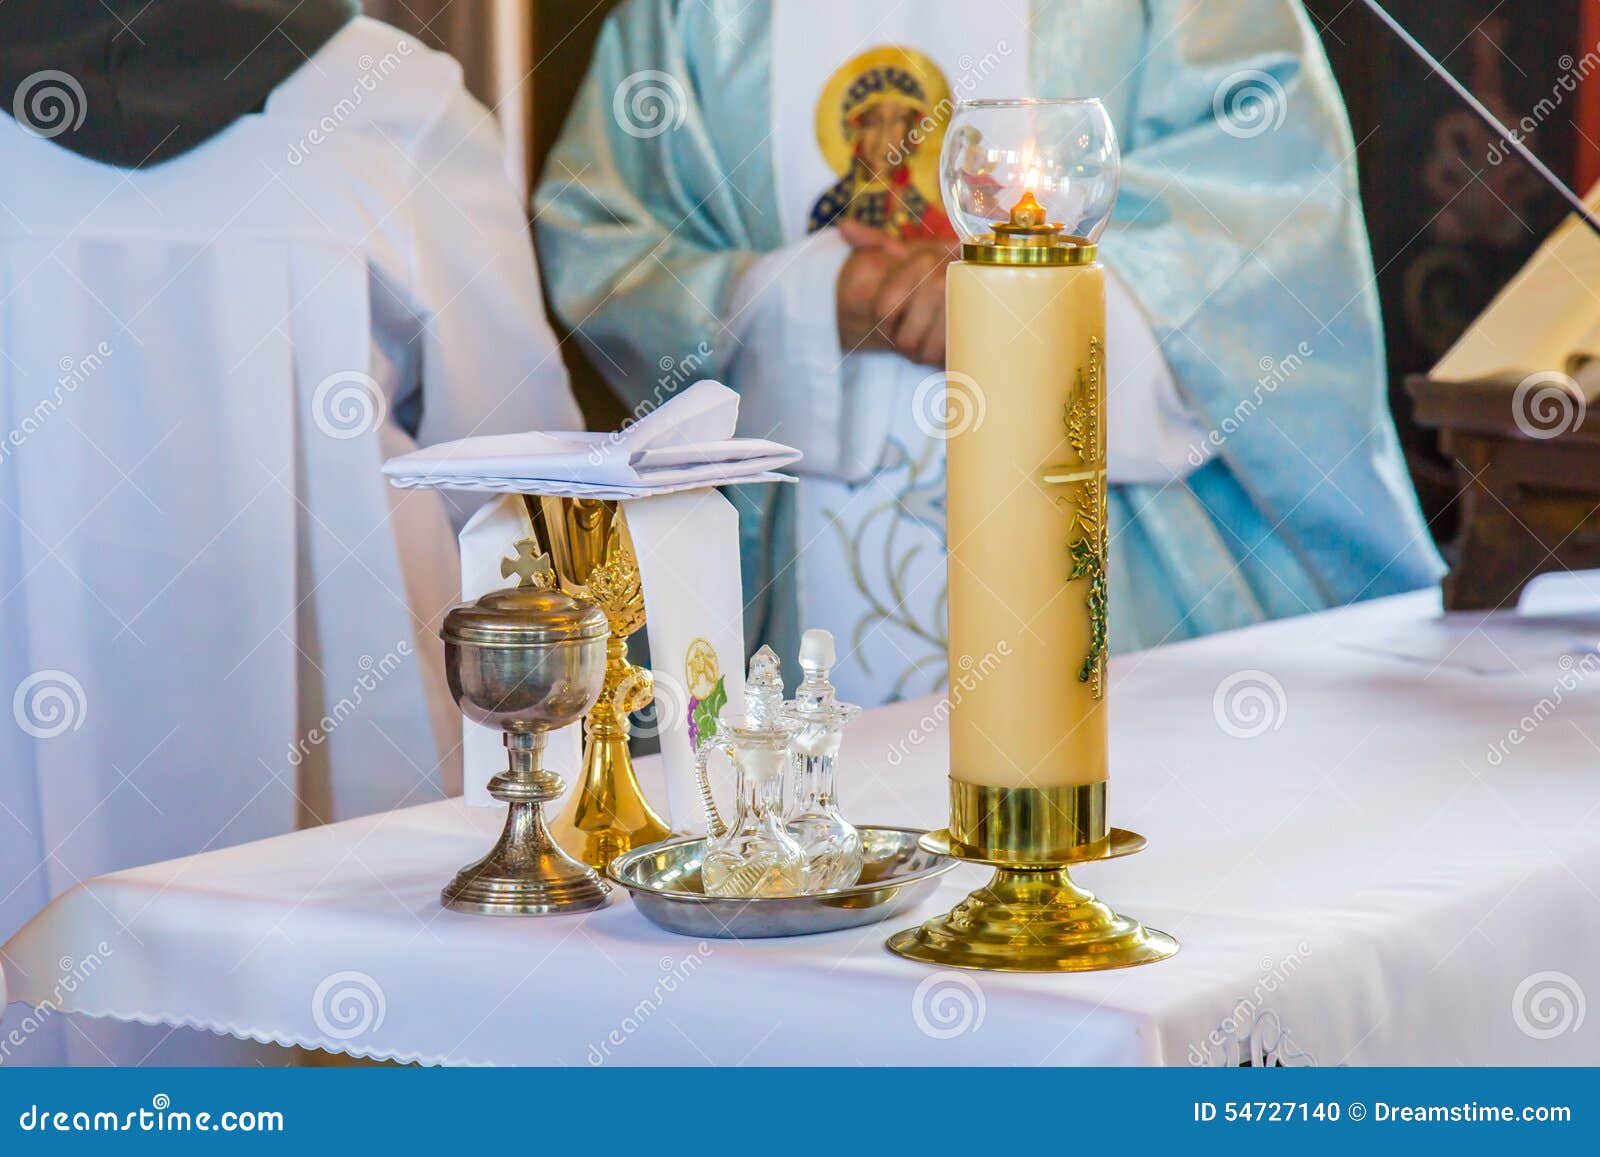 Monstrance - Liturgical Vessels Stock Photo - Image of holy, eucharist ...